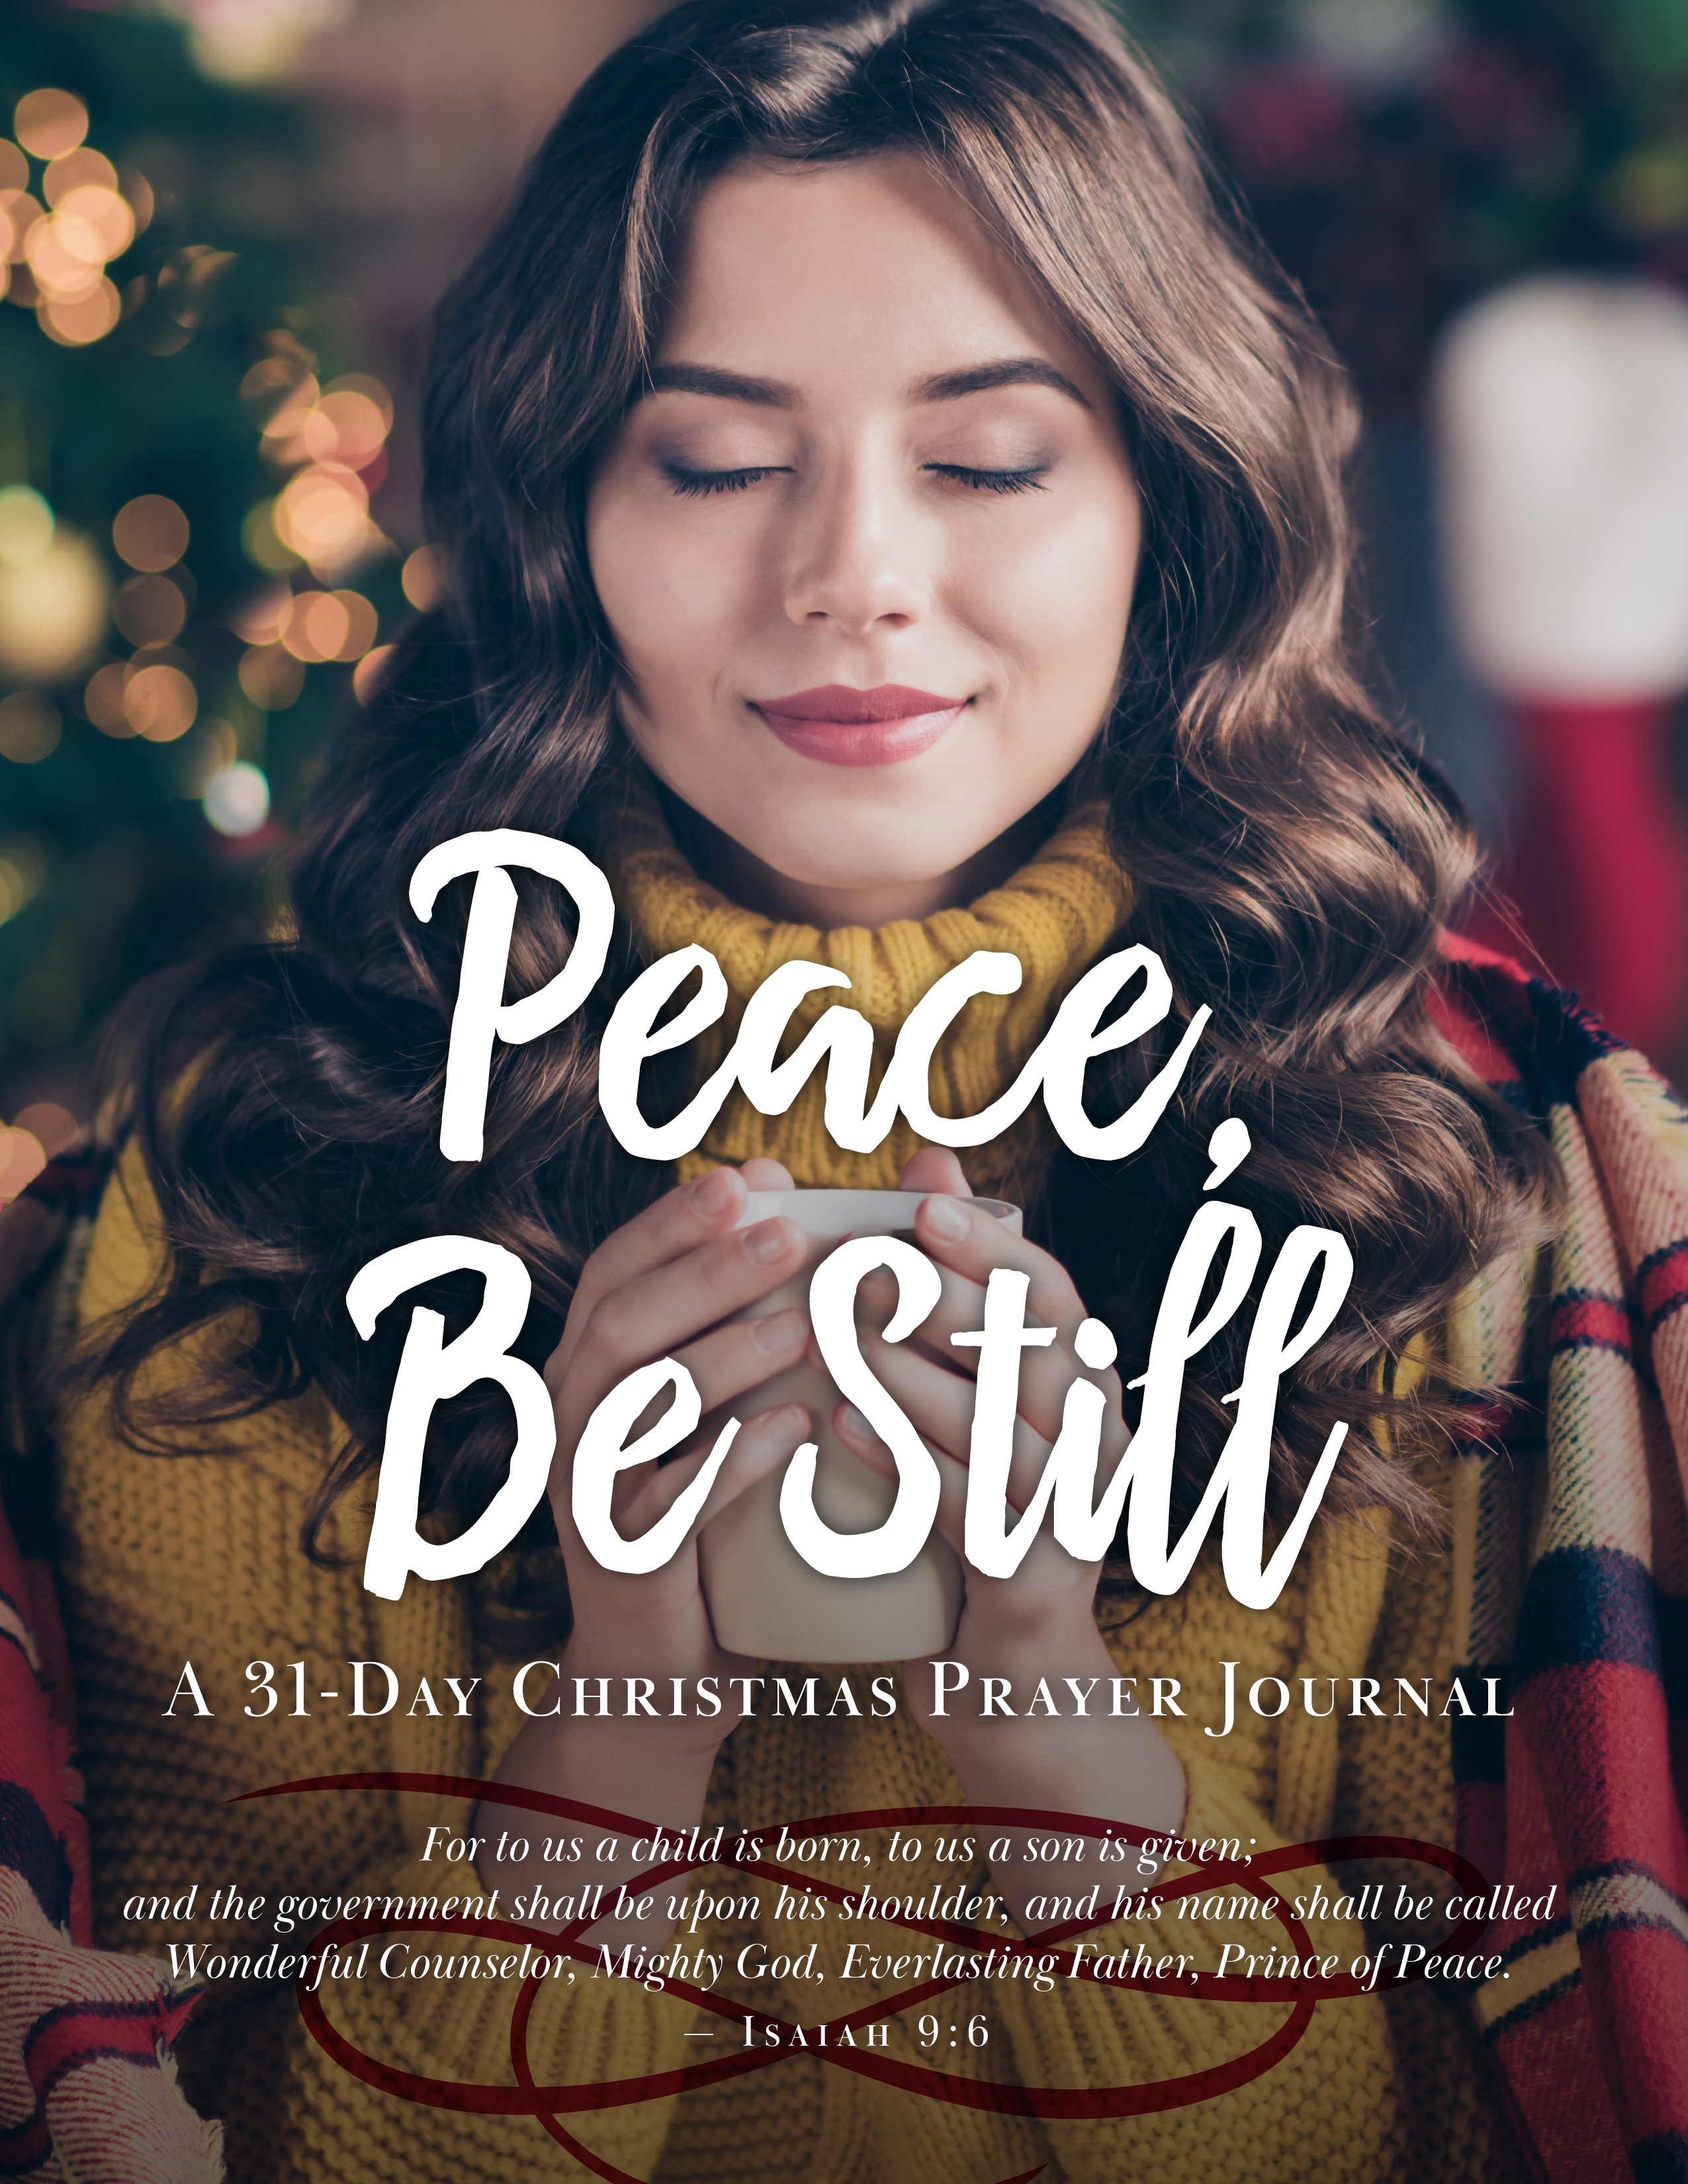 Focus your heart on Jesus this season with this 31-Day Christmas Prayer Journal. Each week offers a devotional and daily reflection for prayer. #WomenLivingWell #GoodMorningGirls #prayerjournal #Christmas